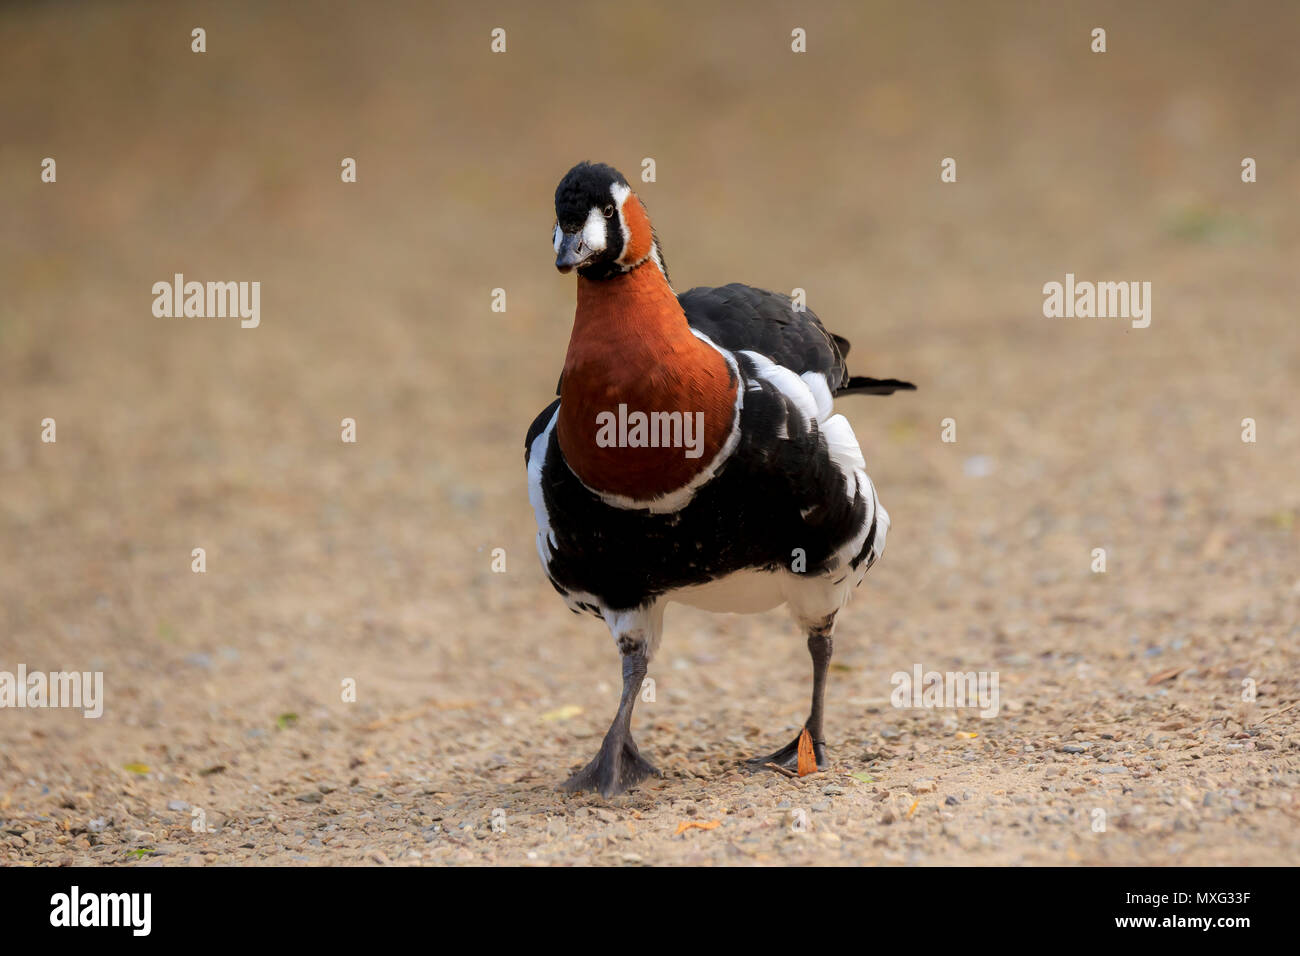 Close up portrait of a Red-breasted goose (Branta ruficollis) walking funny on dirt. Stock Photo